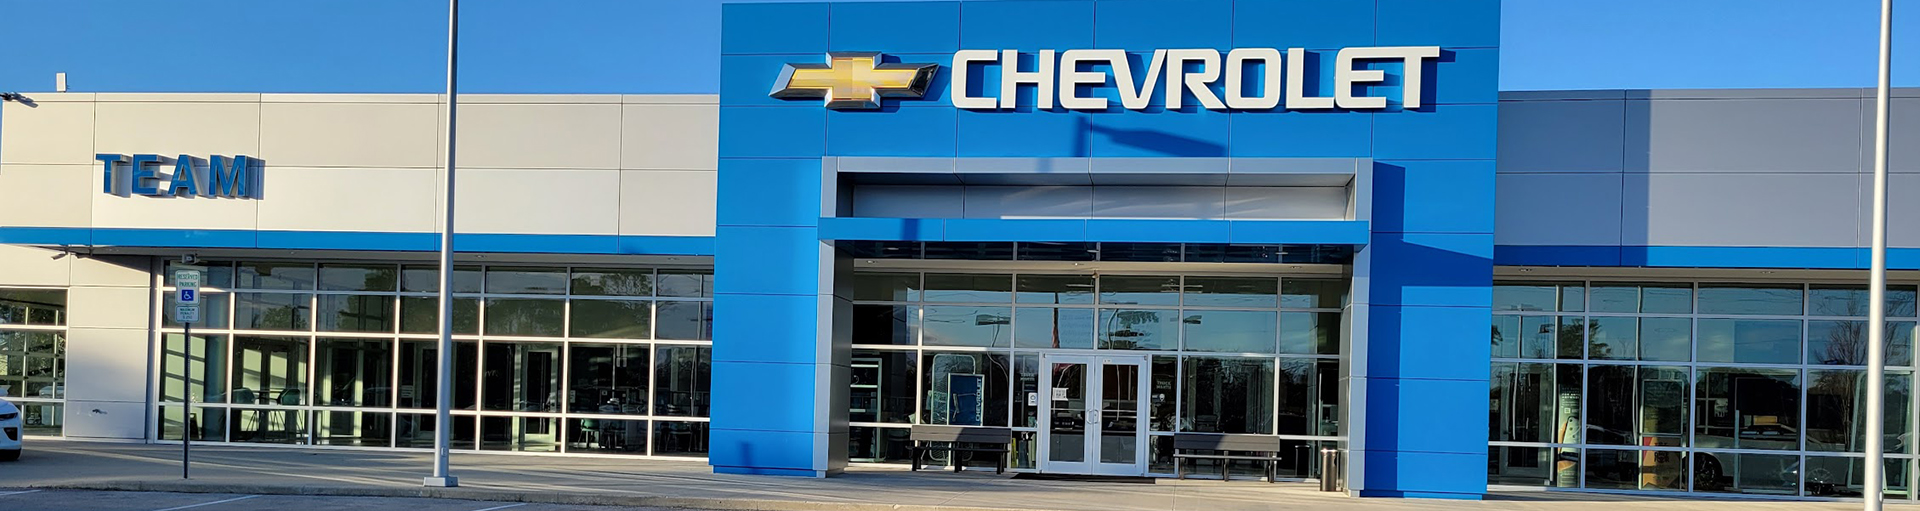 Chevrolet Spend and Save Service in Swansboro, NC